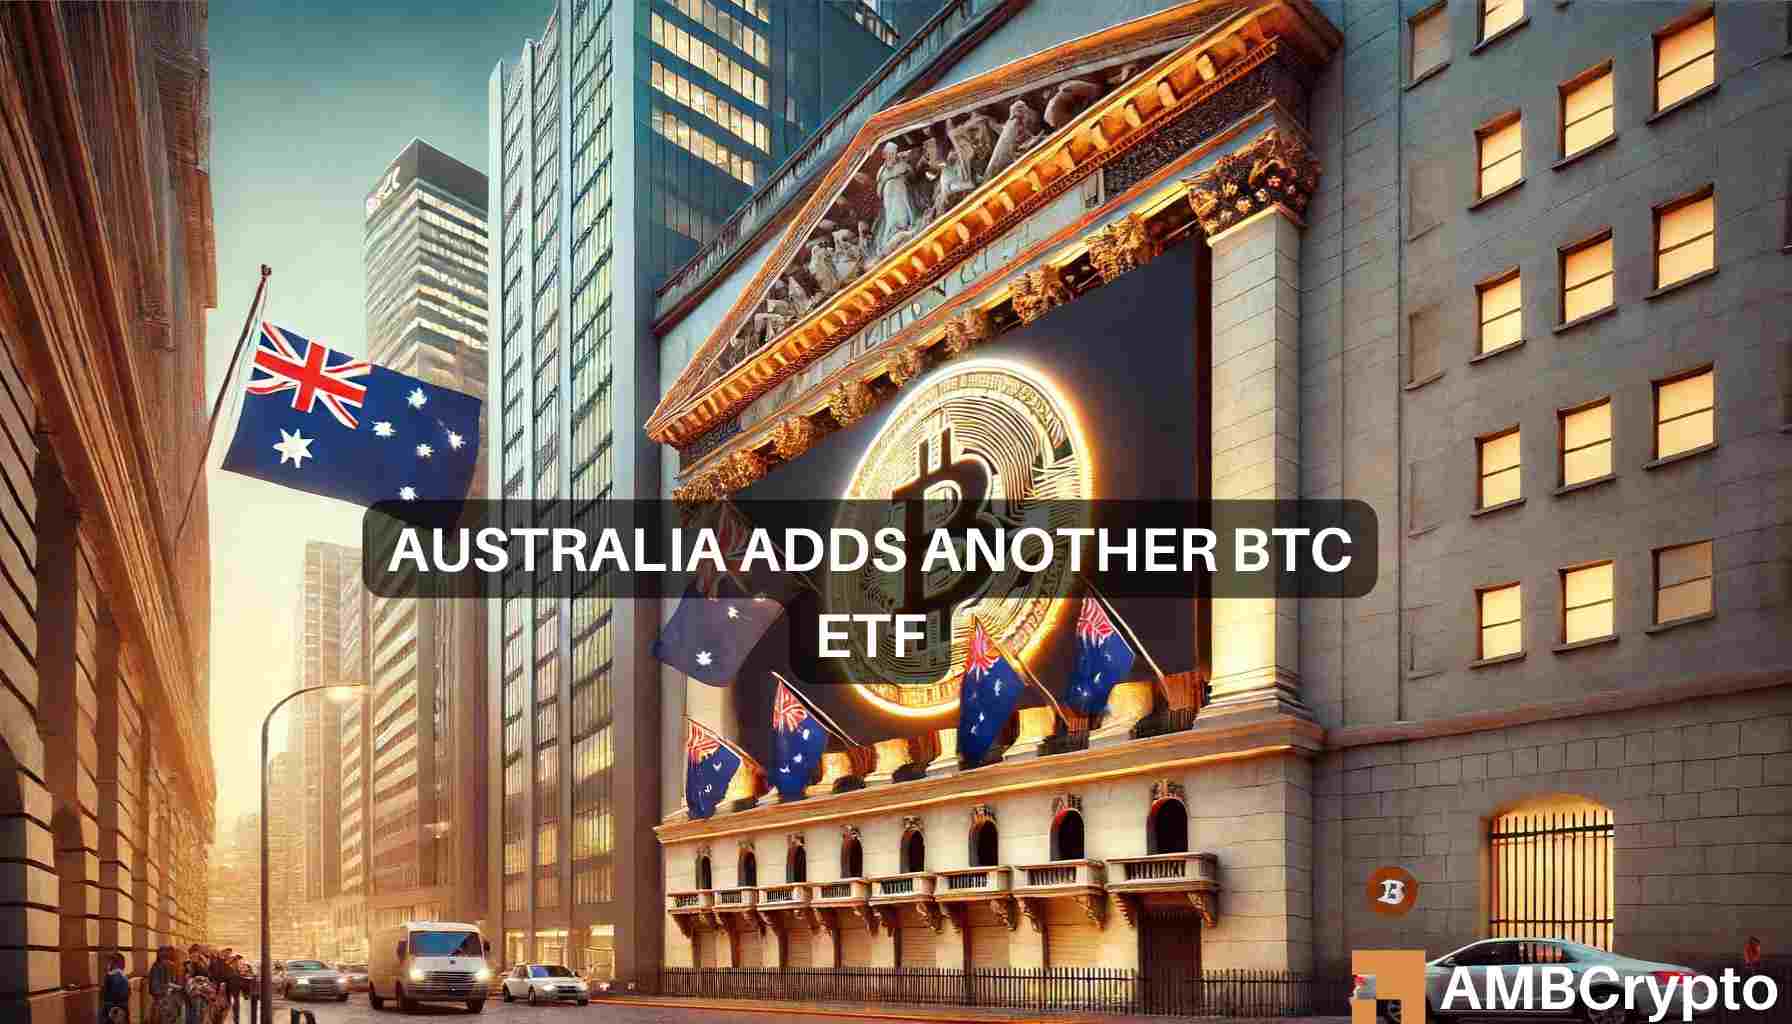 Bitcoin ETF: Australia to launch first BTC ETF with VanEck